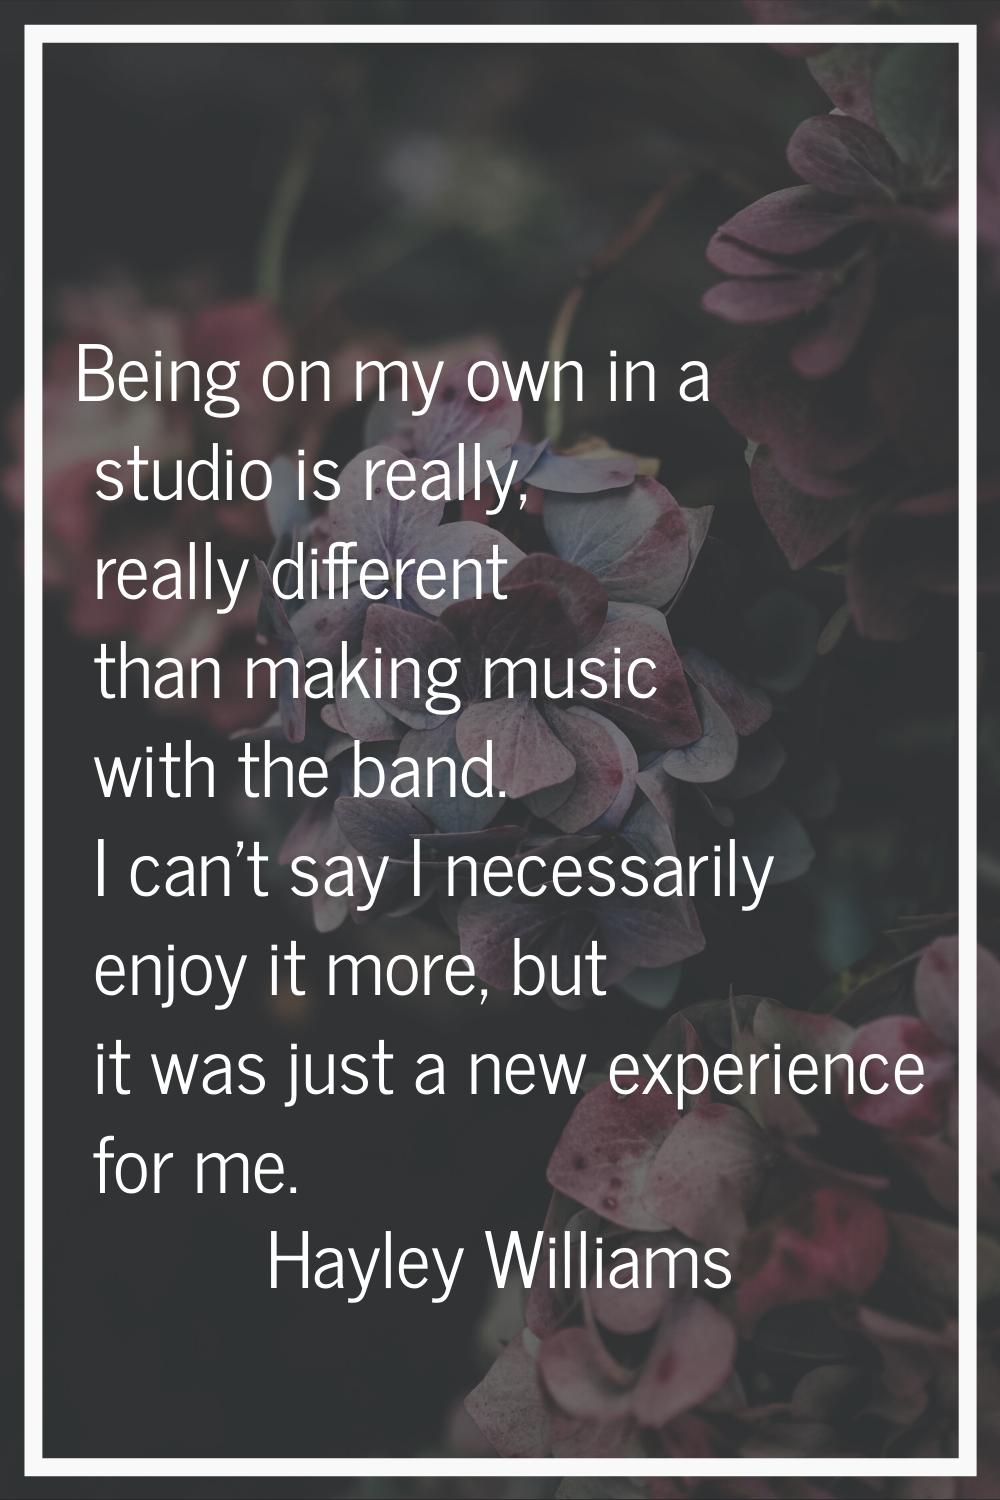 Being on my own in a studio is really, really different than making music with the band. I can't sa